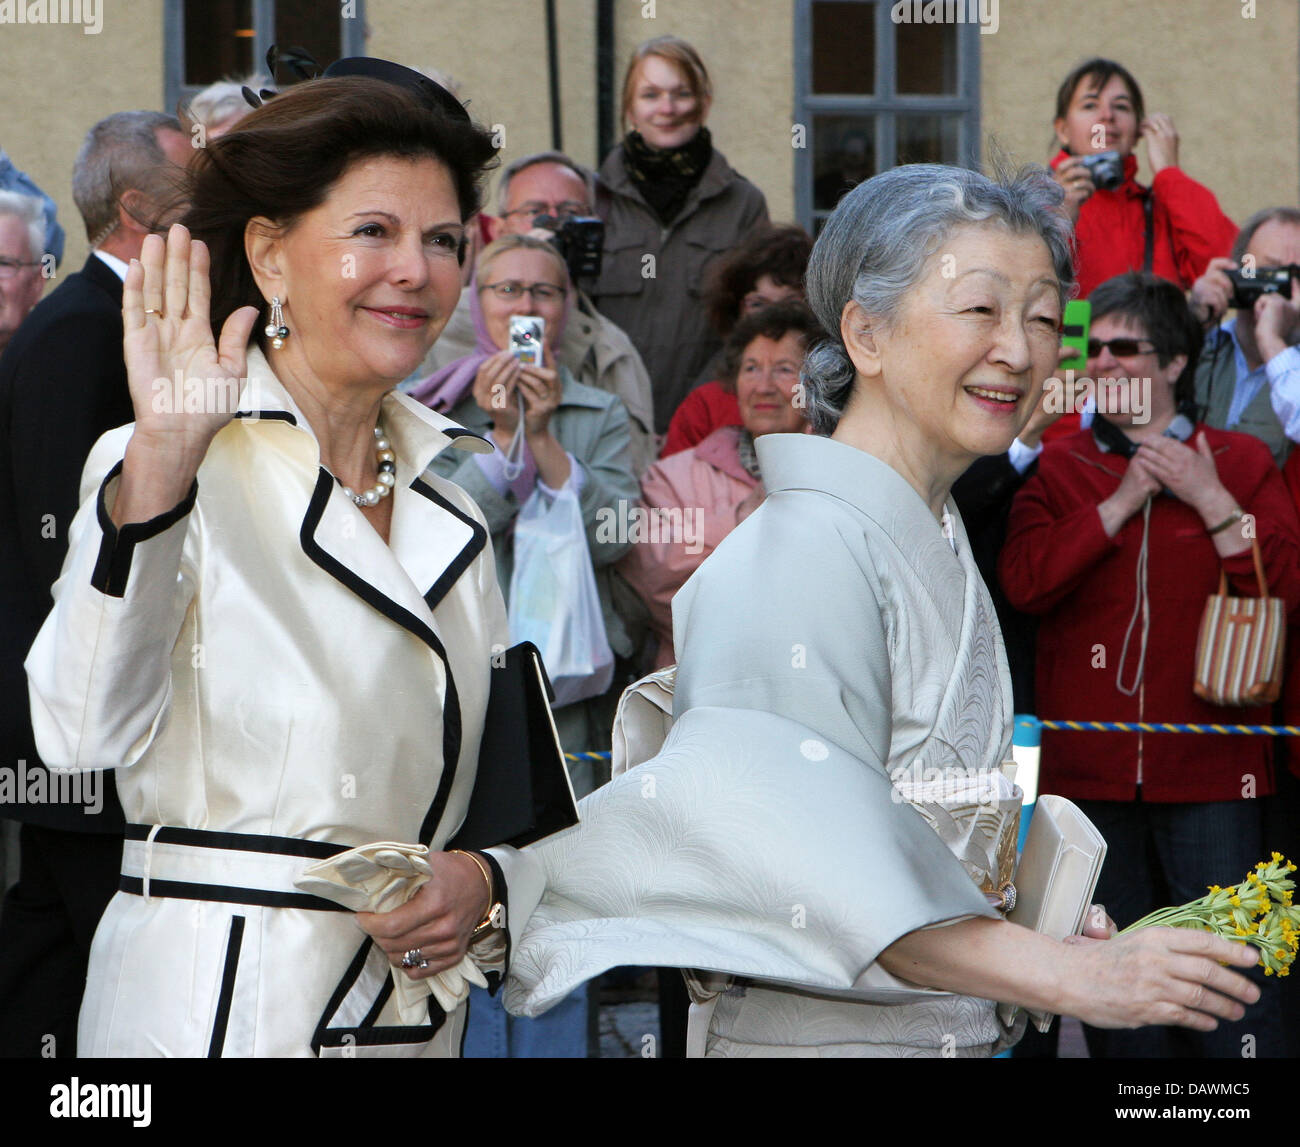 Queen Silvia of Sweden (L) and Empress Michiko of Japan (R) arrive to the cathedral of Uppsala, Sweden, 23 May 2007. Emperor Aikhito of Japan and his wife Empress Michiko of Japan participated in the celebrations to the 300th anniversary of Swedish scientist Carl Linnaeus within the scope of their 2007 Visit to Europe. Photo: Albert Nieboer (NETHERLANDS OUT) Stock Photo